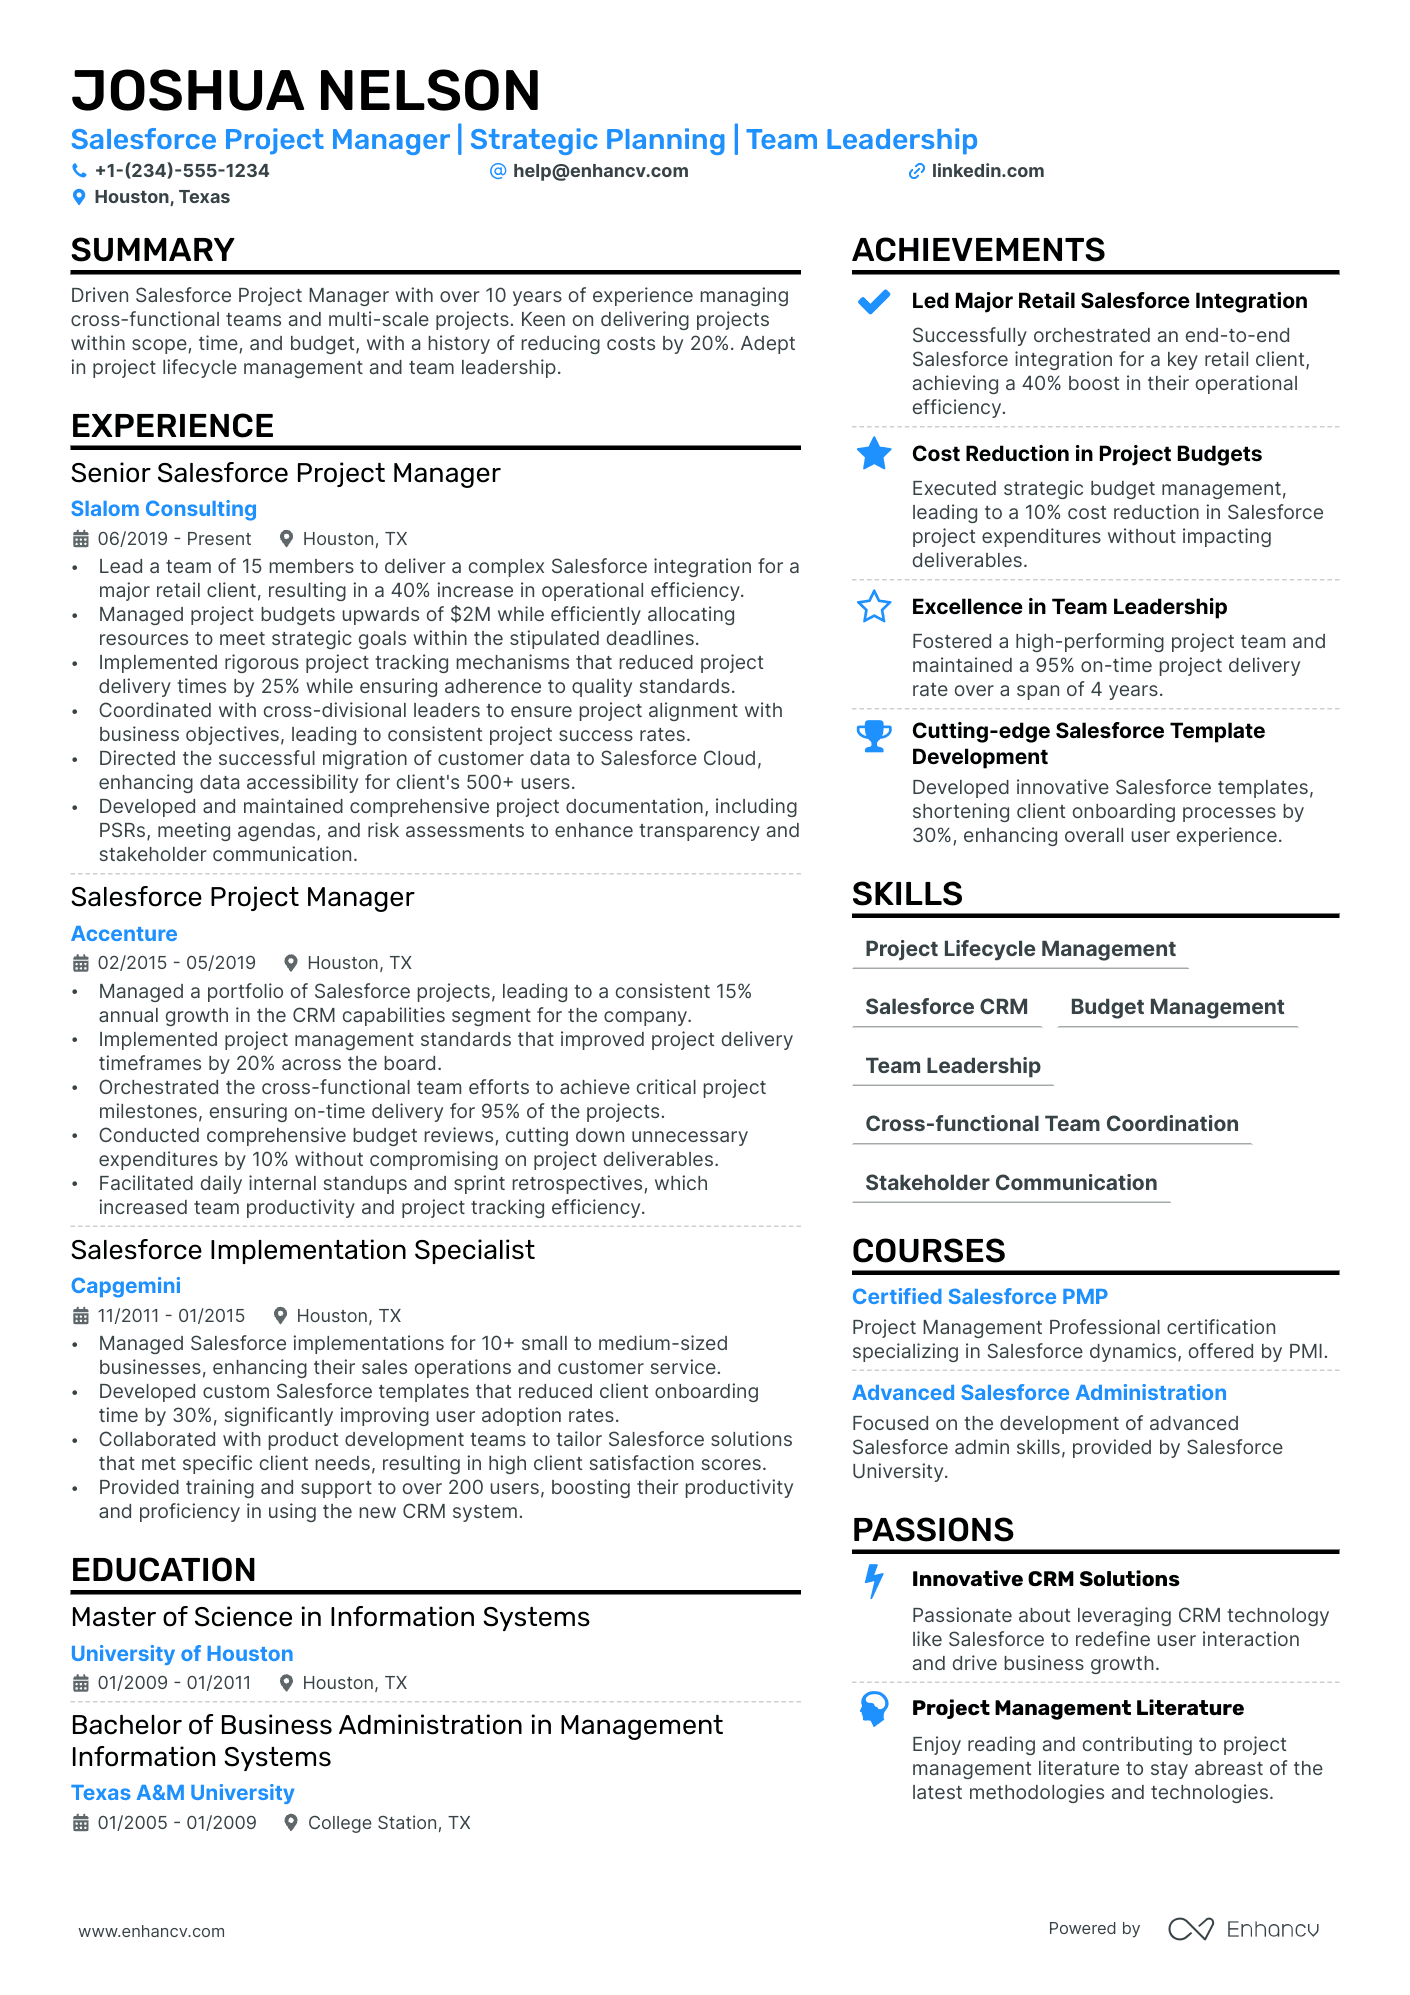 Salesforce Project Manager resume example